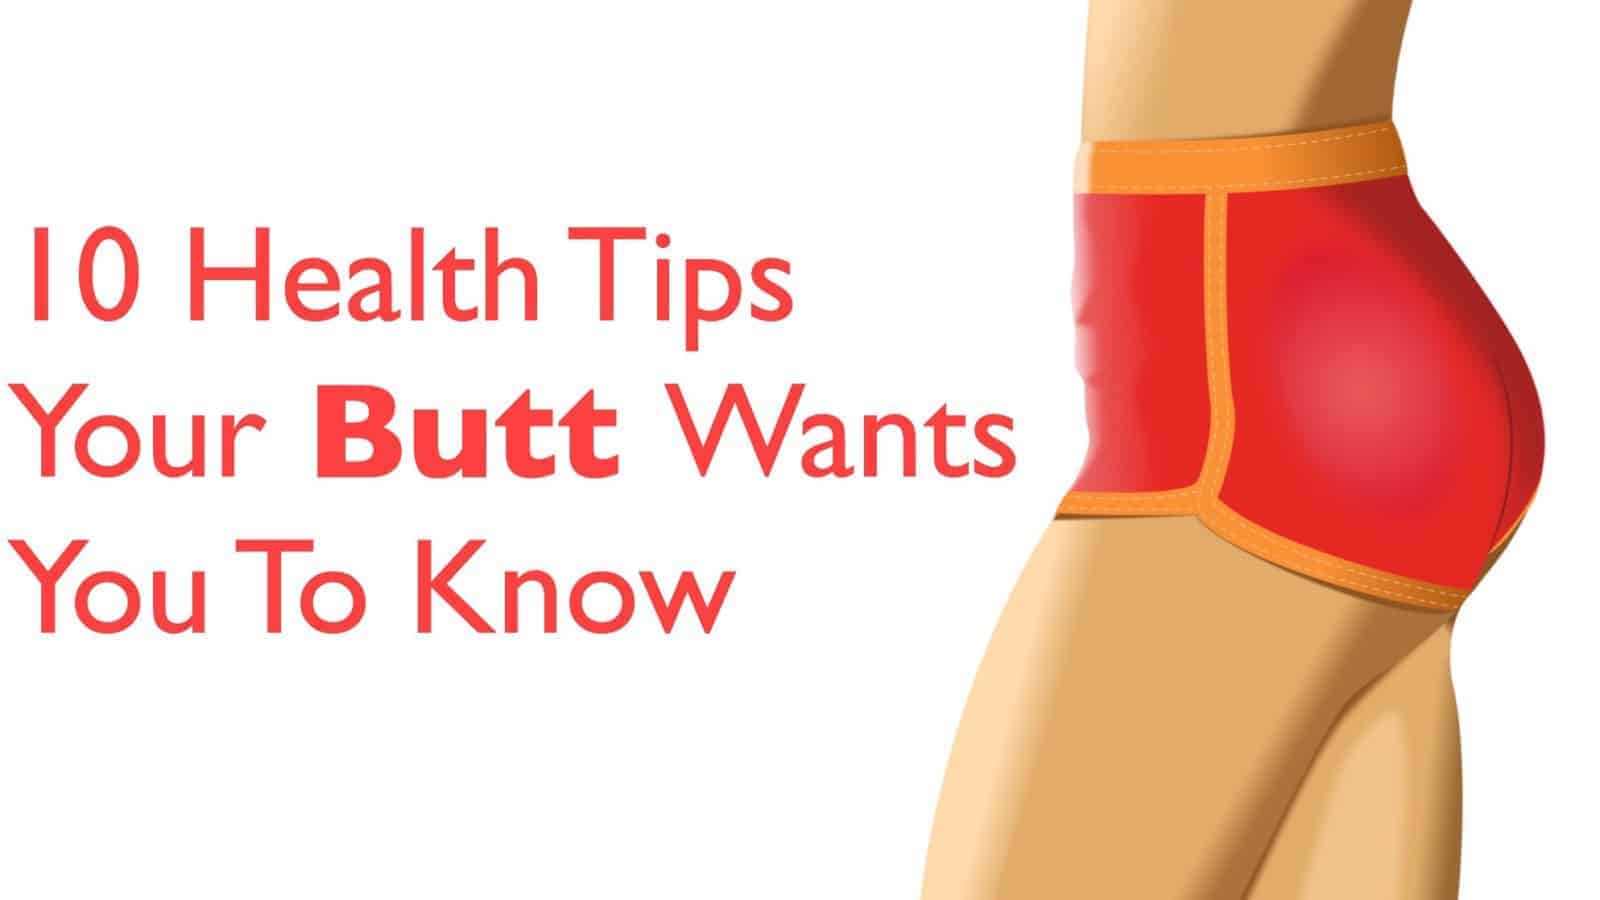 10 Health Tips Your Butt Wants You To Know